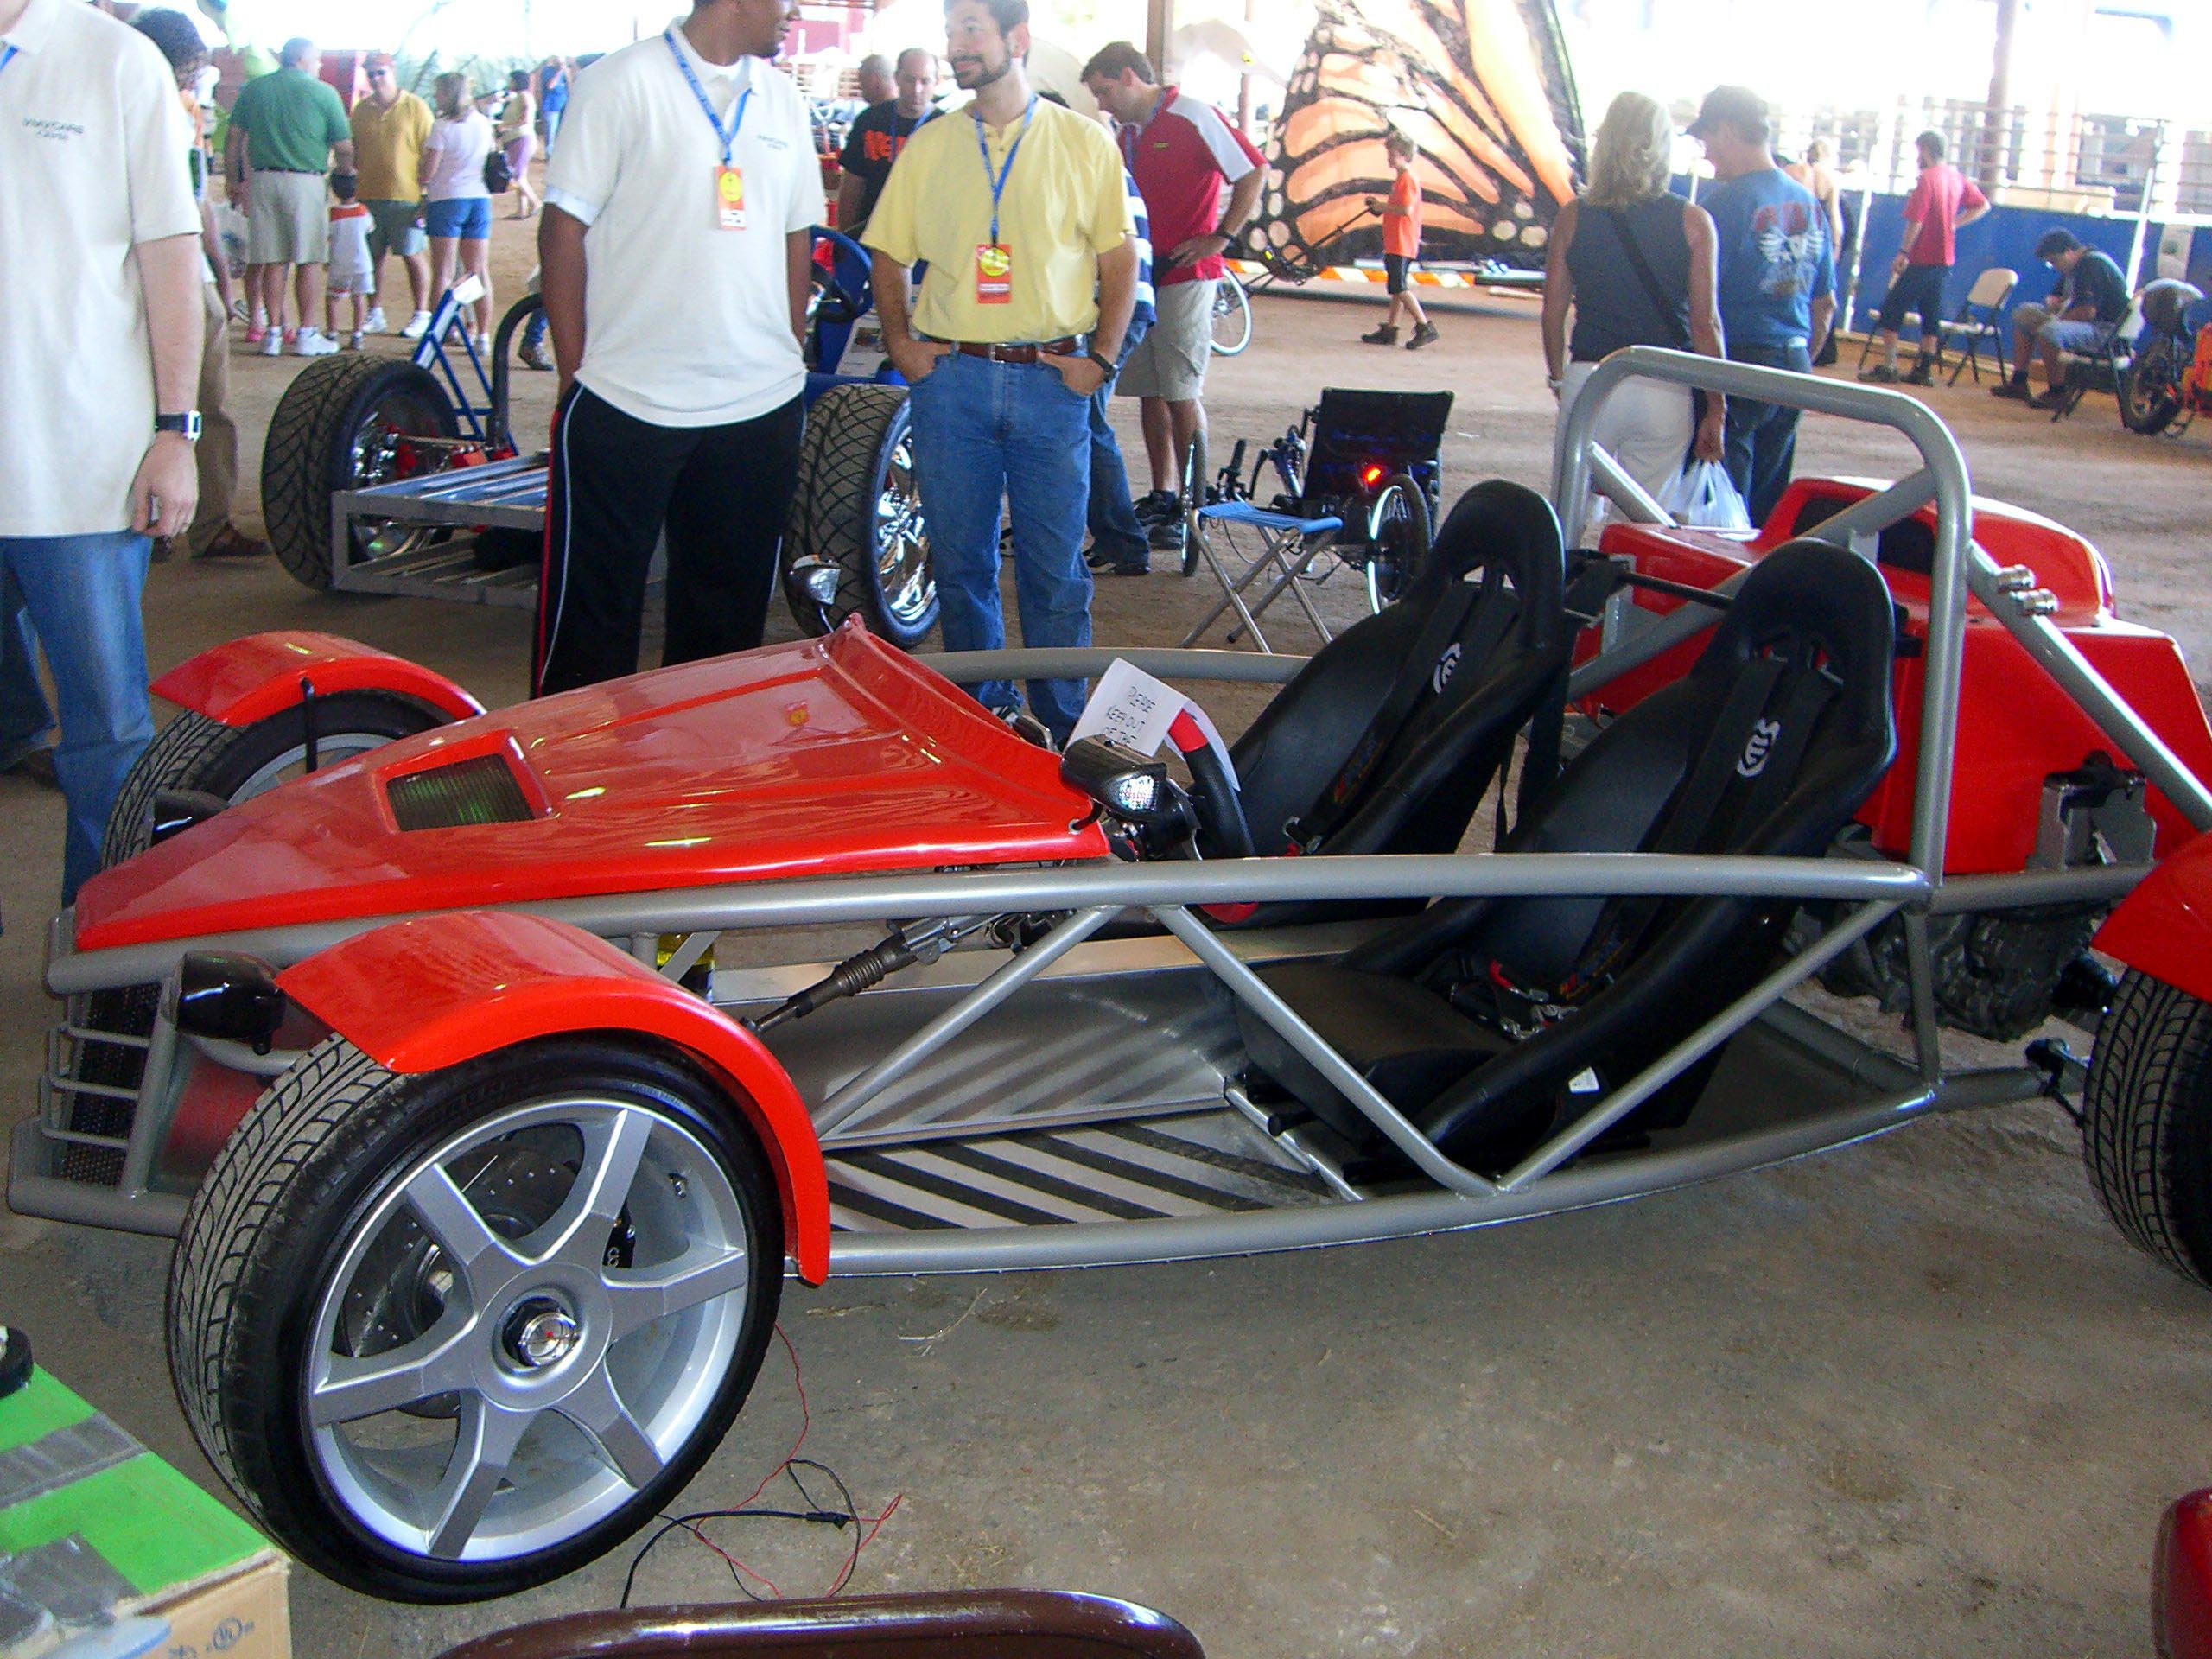 A shiny red electric car at the Maker Faire 2007